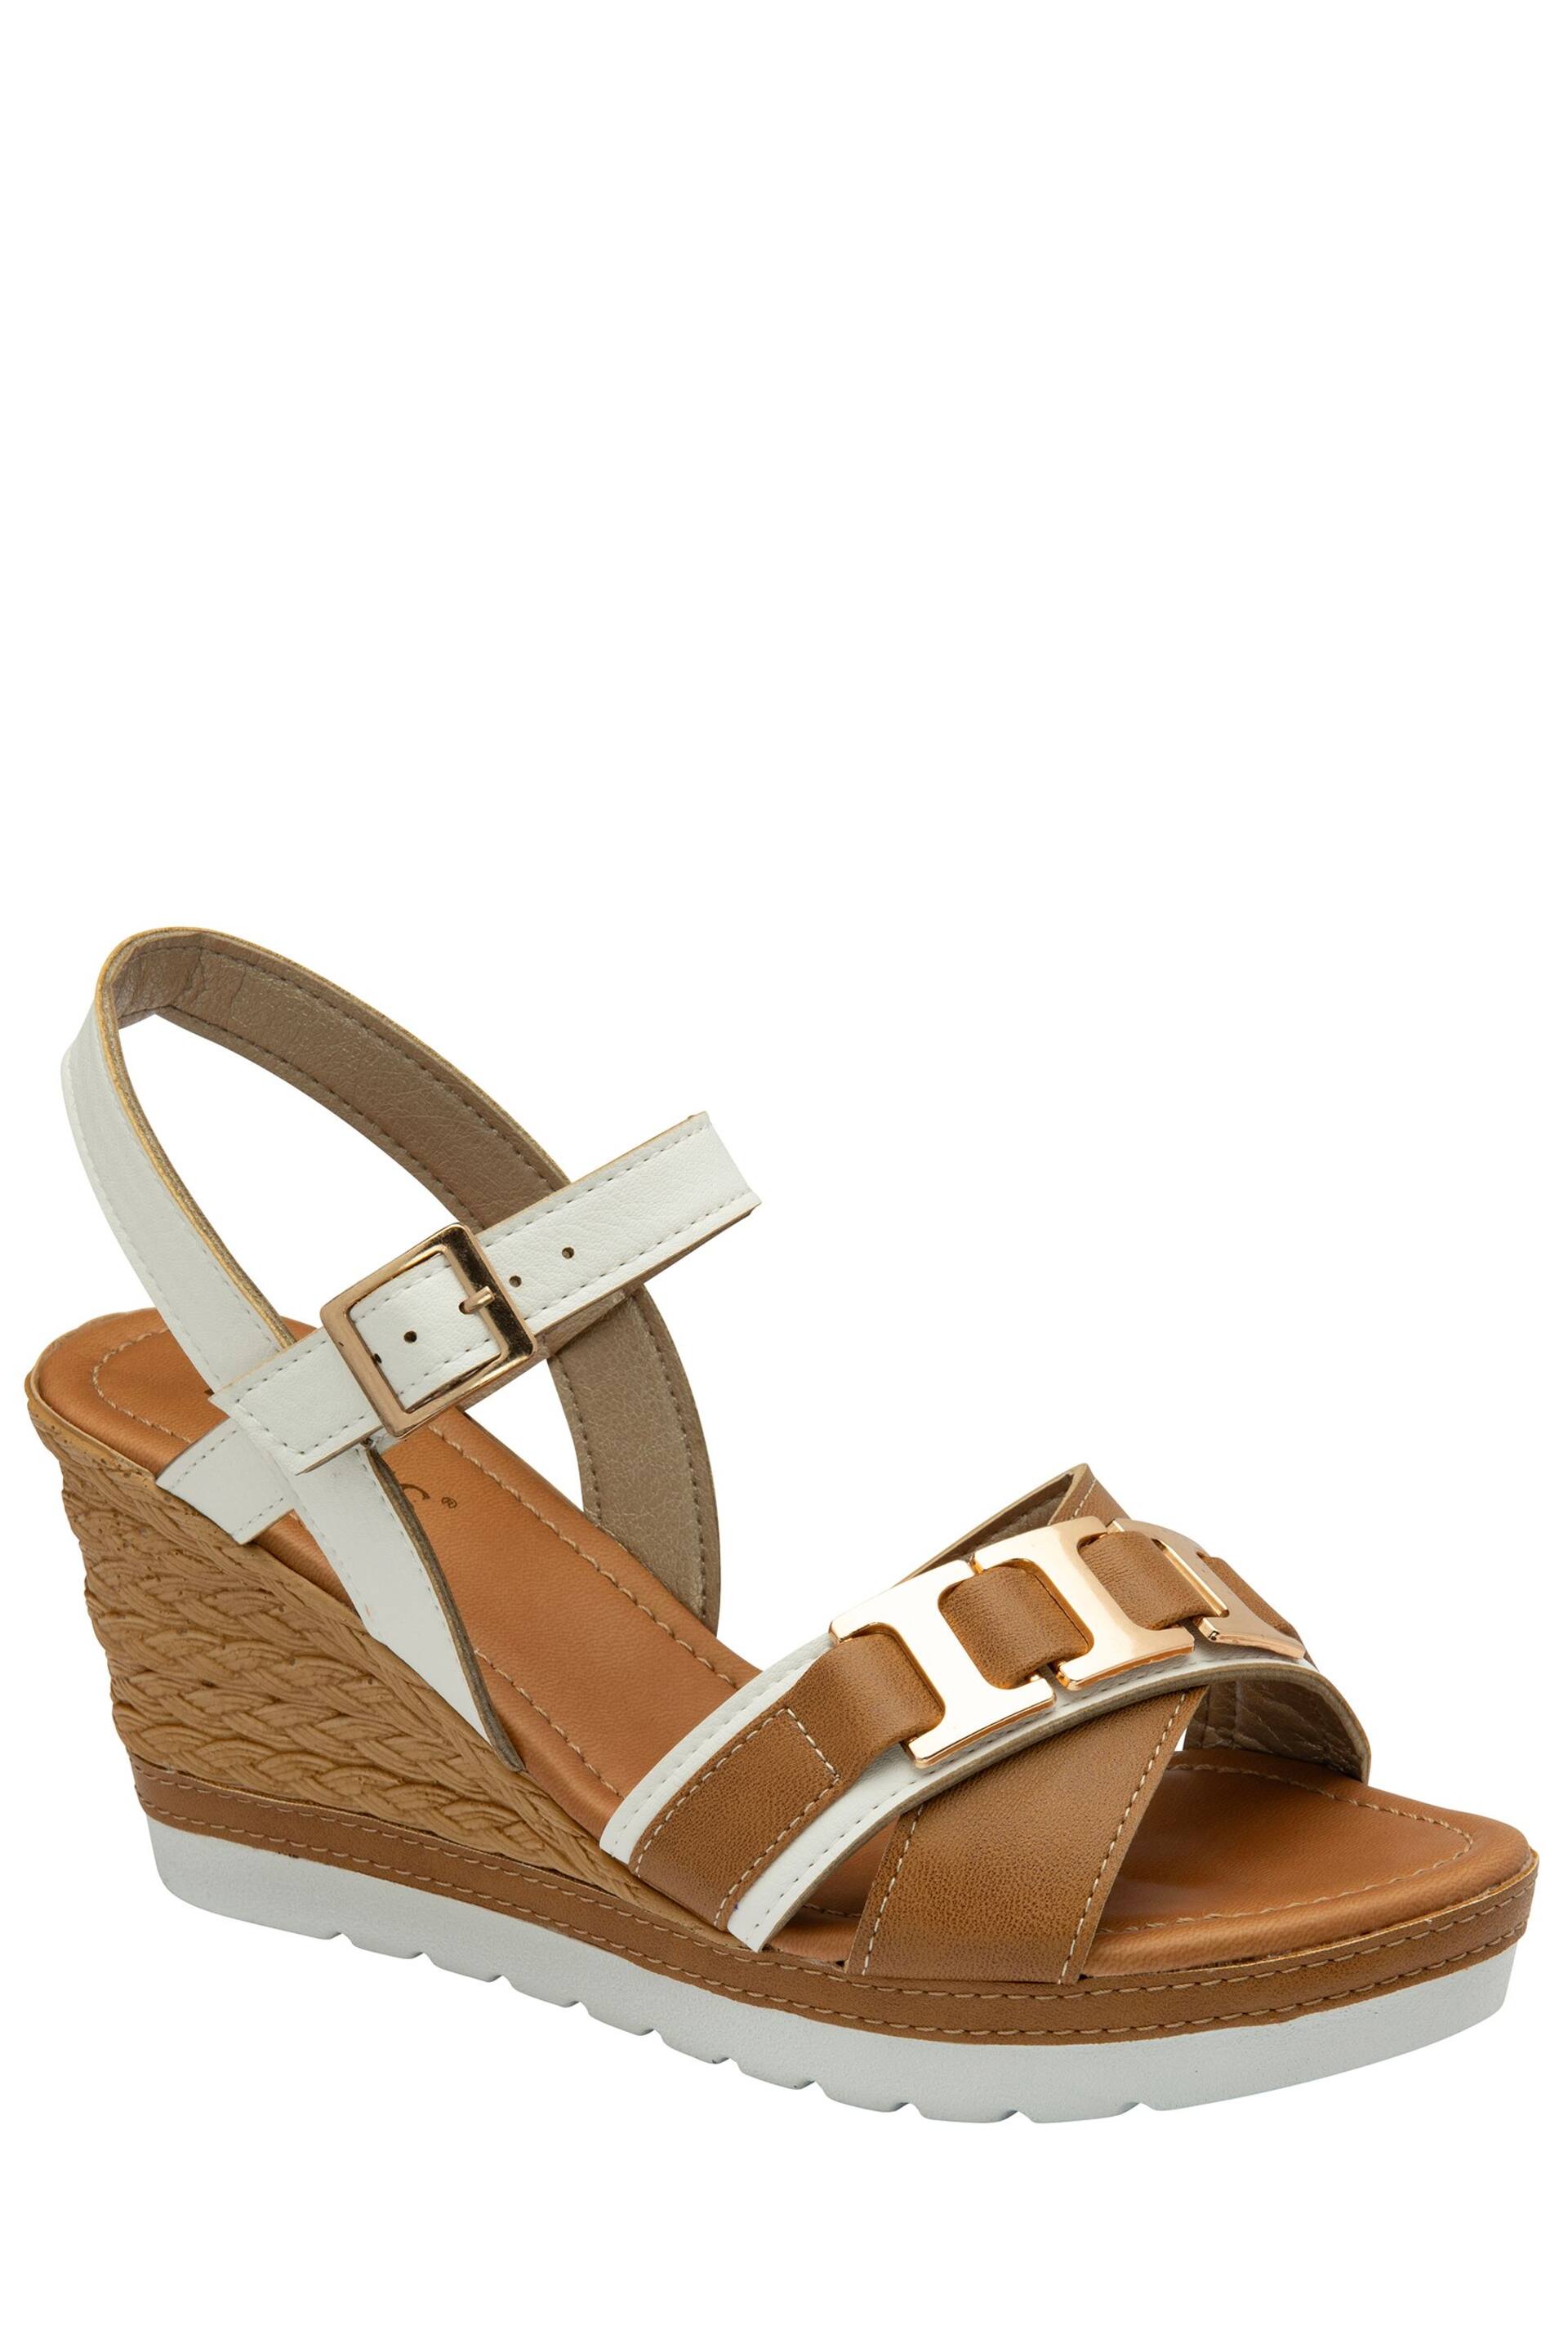 Lotus White Casual Wedge Sandals - Image 1 of 4